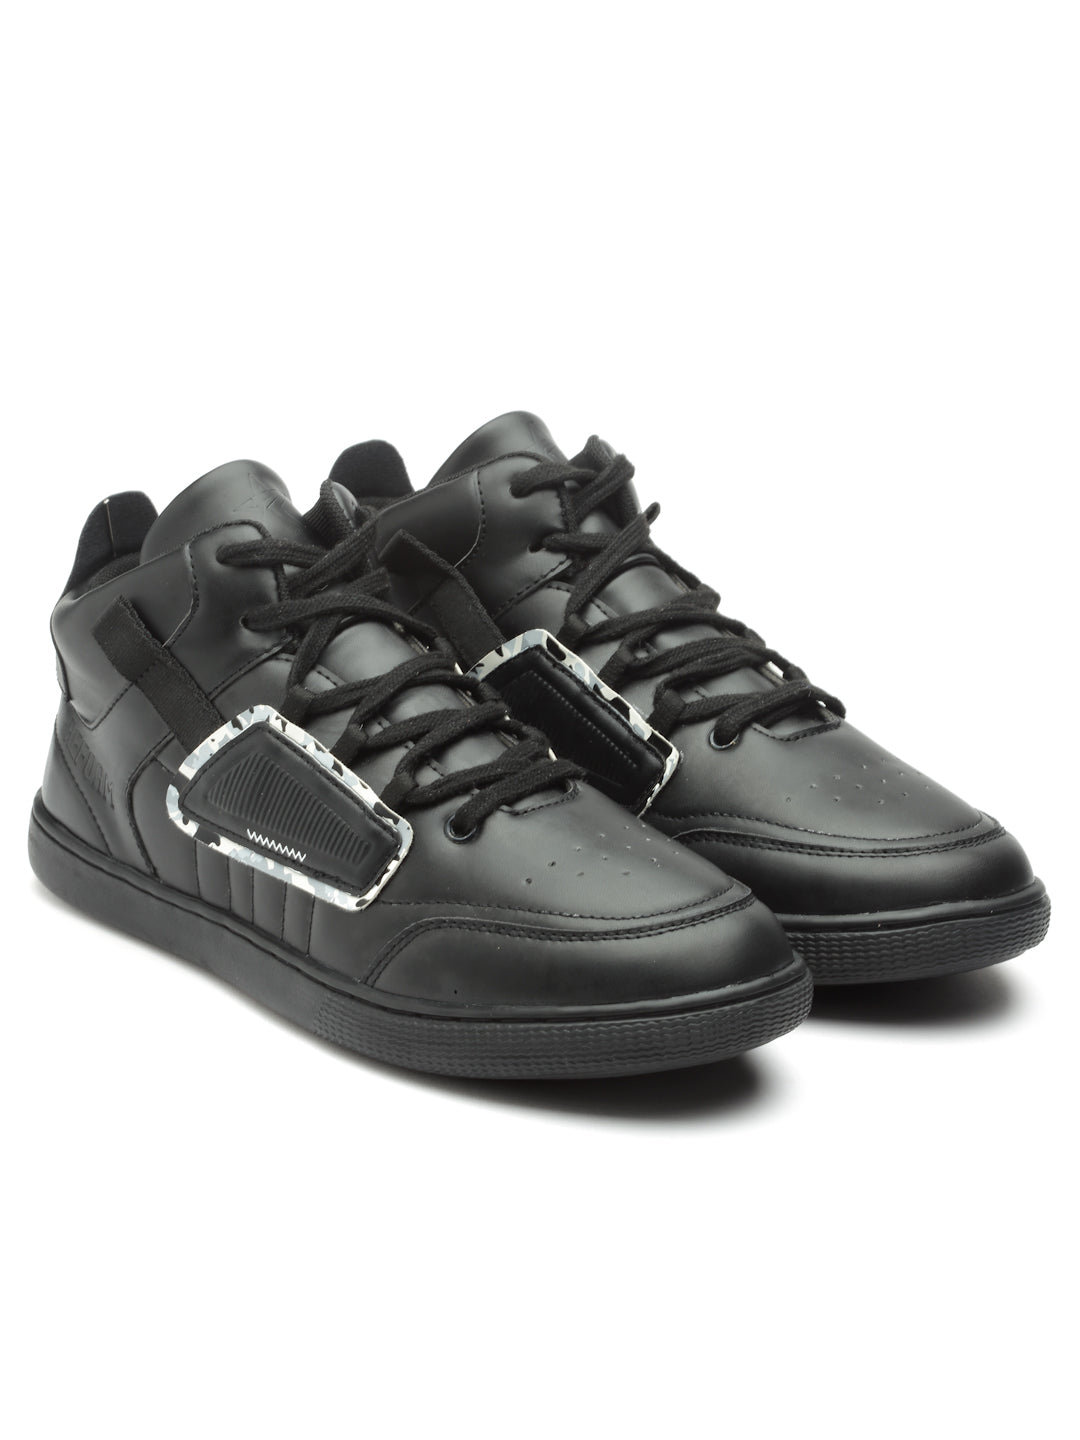 REFOAM Men's Black Synthetic Leather Lace-Up Casual Sneaker